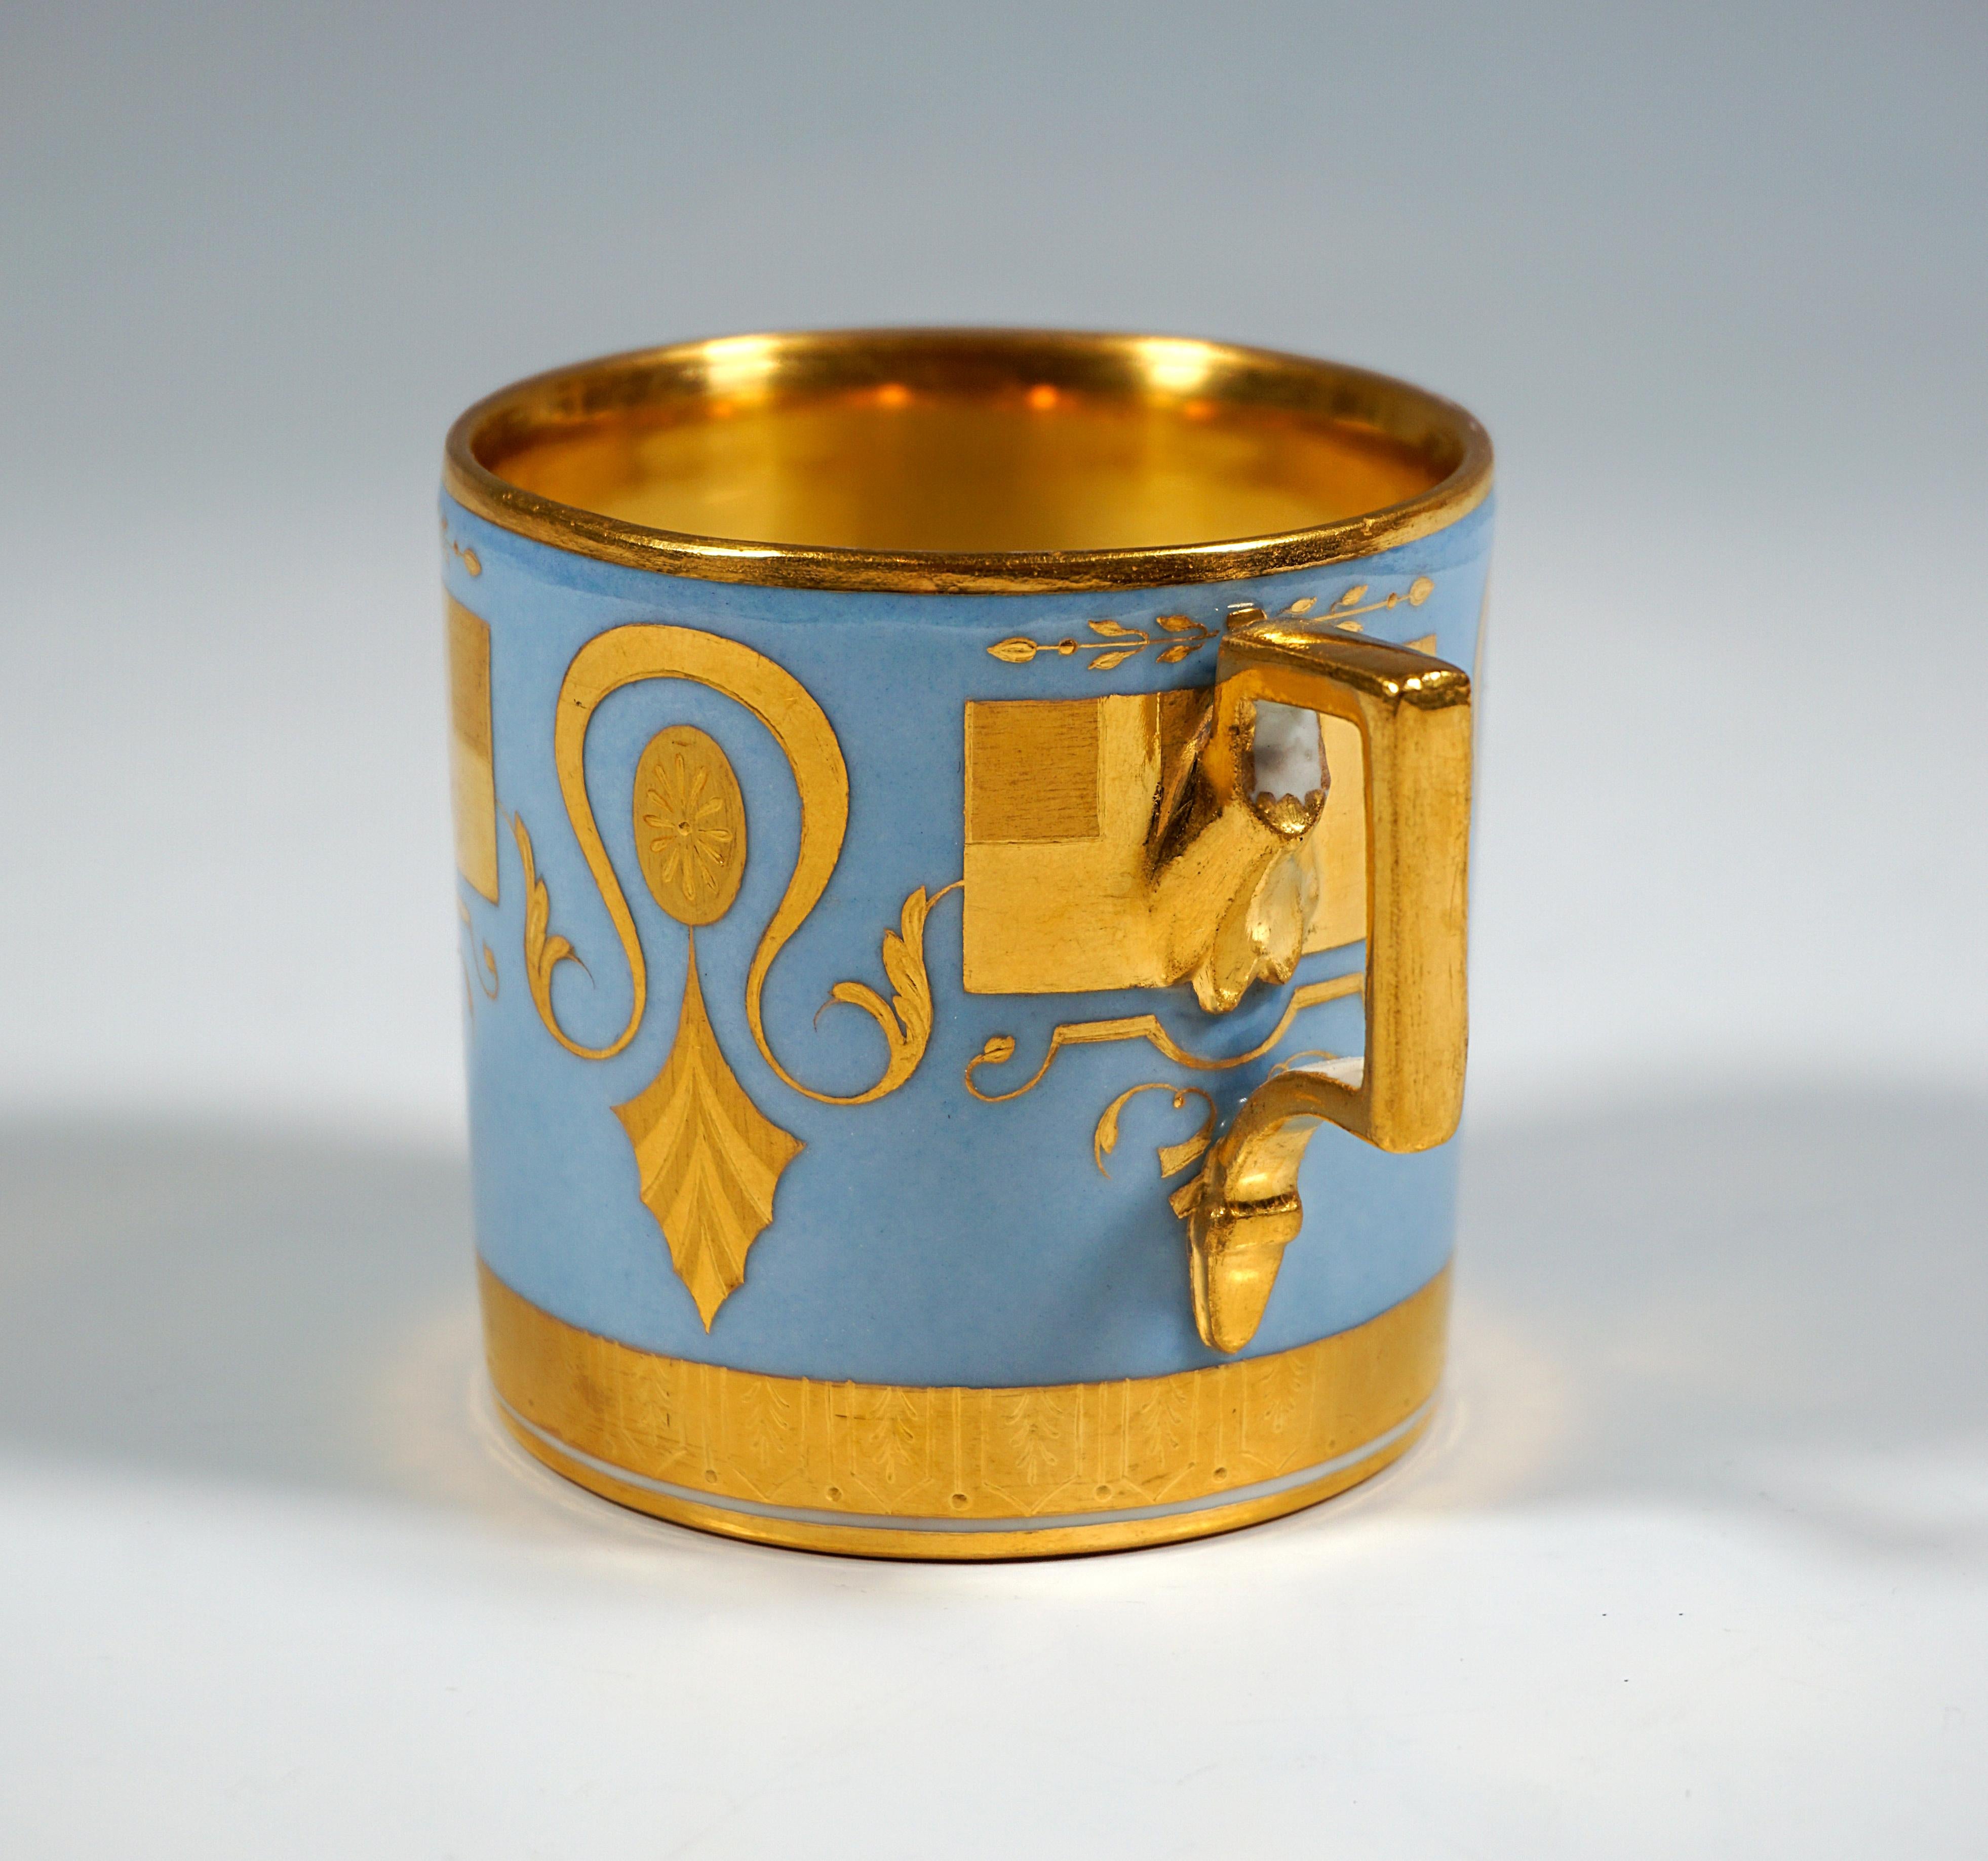 Early 19th Century Vienna Imperial Empire Porcelain Collecting Cup, Sky Blue and Gold, 1808